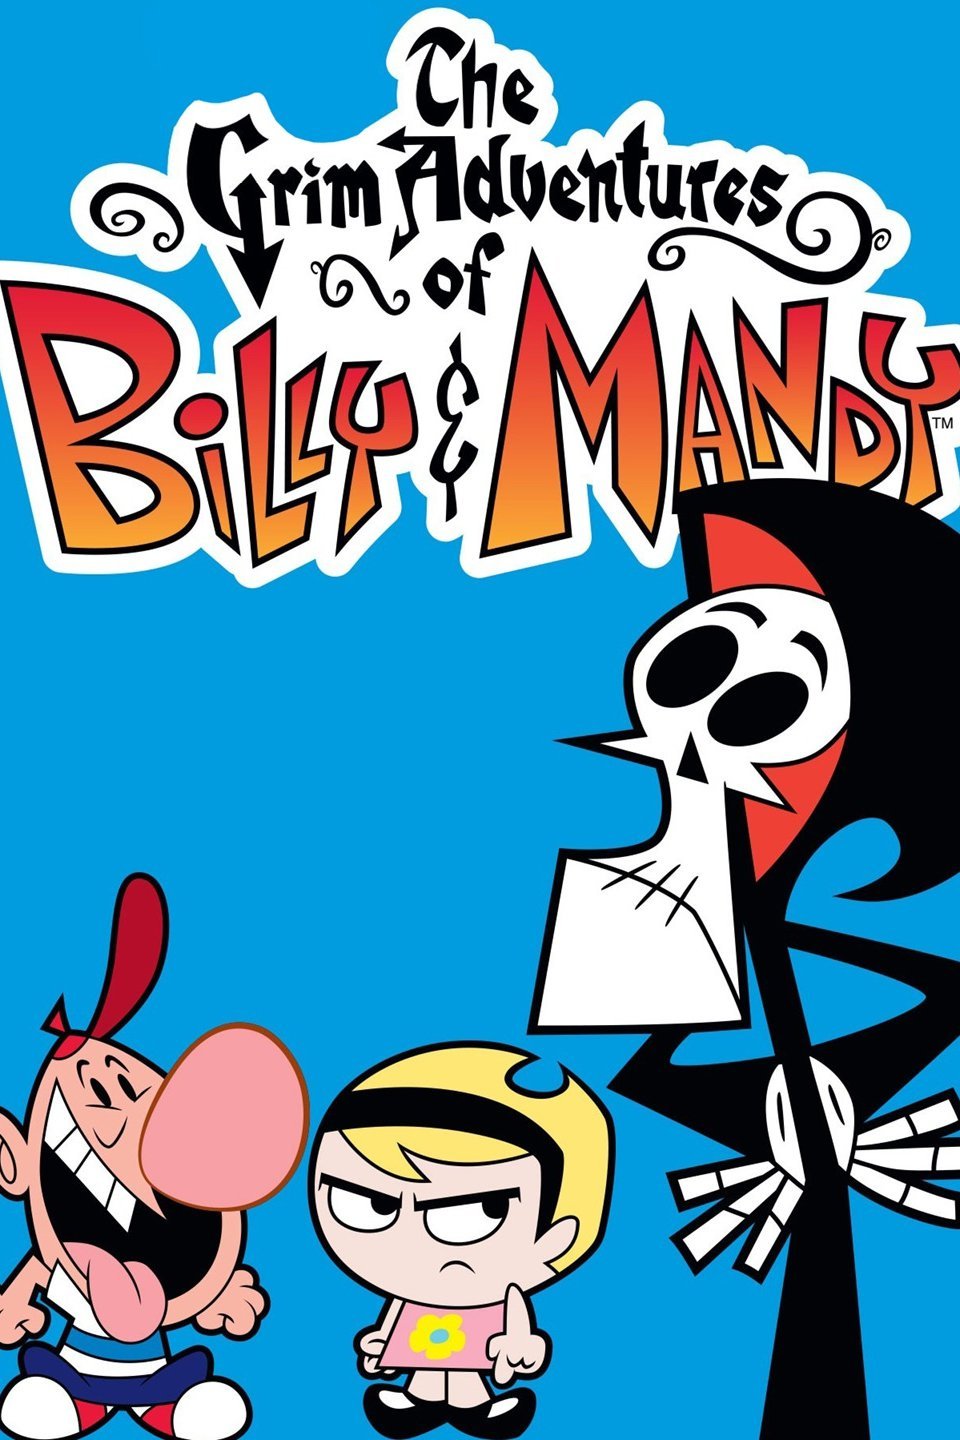 Adventure of billy and mandy